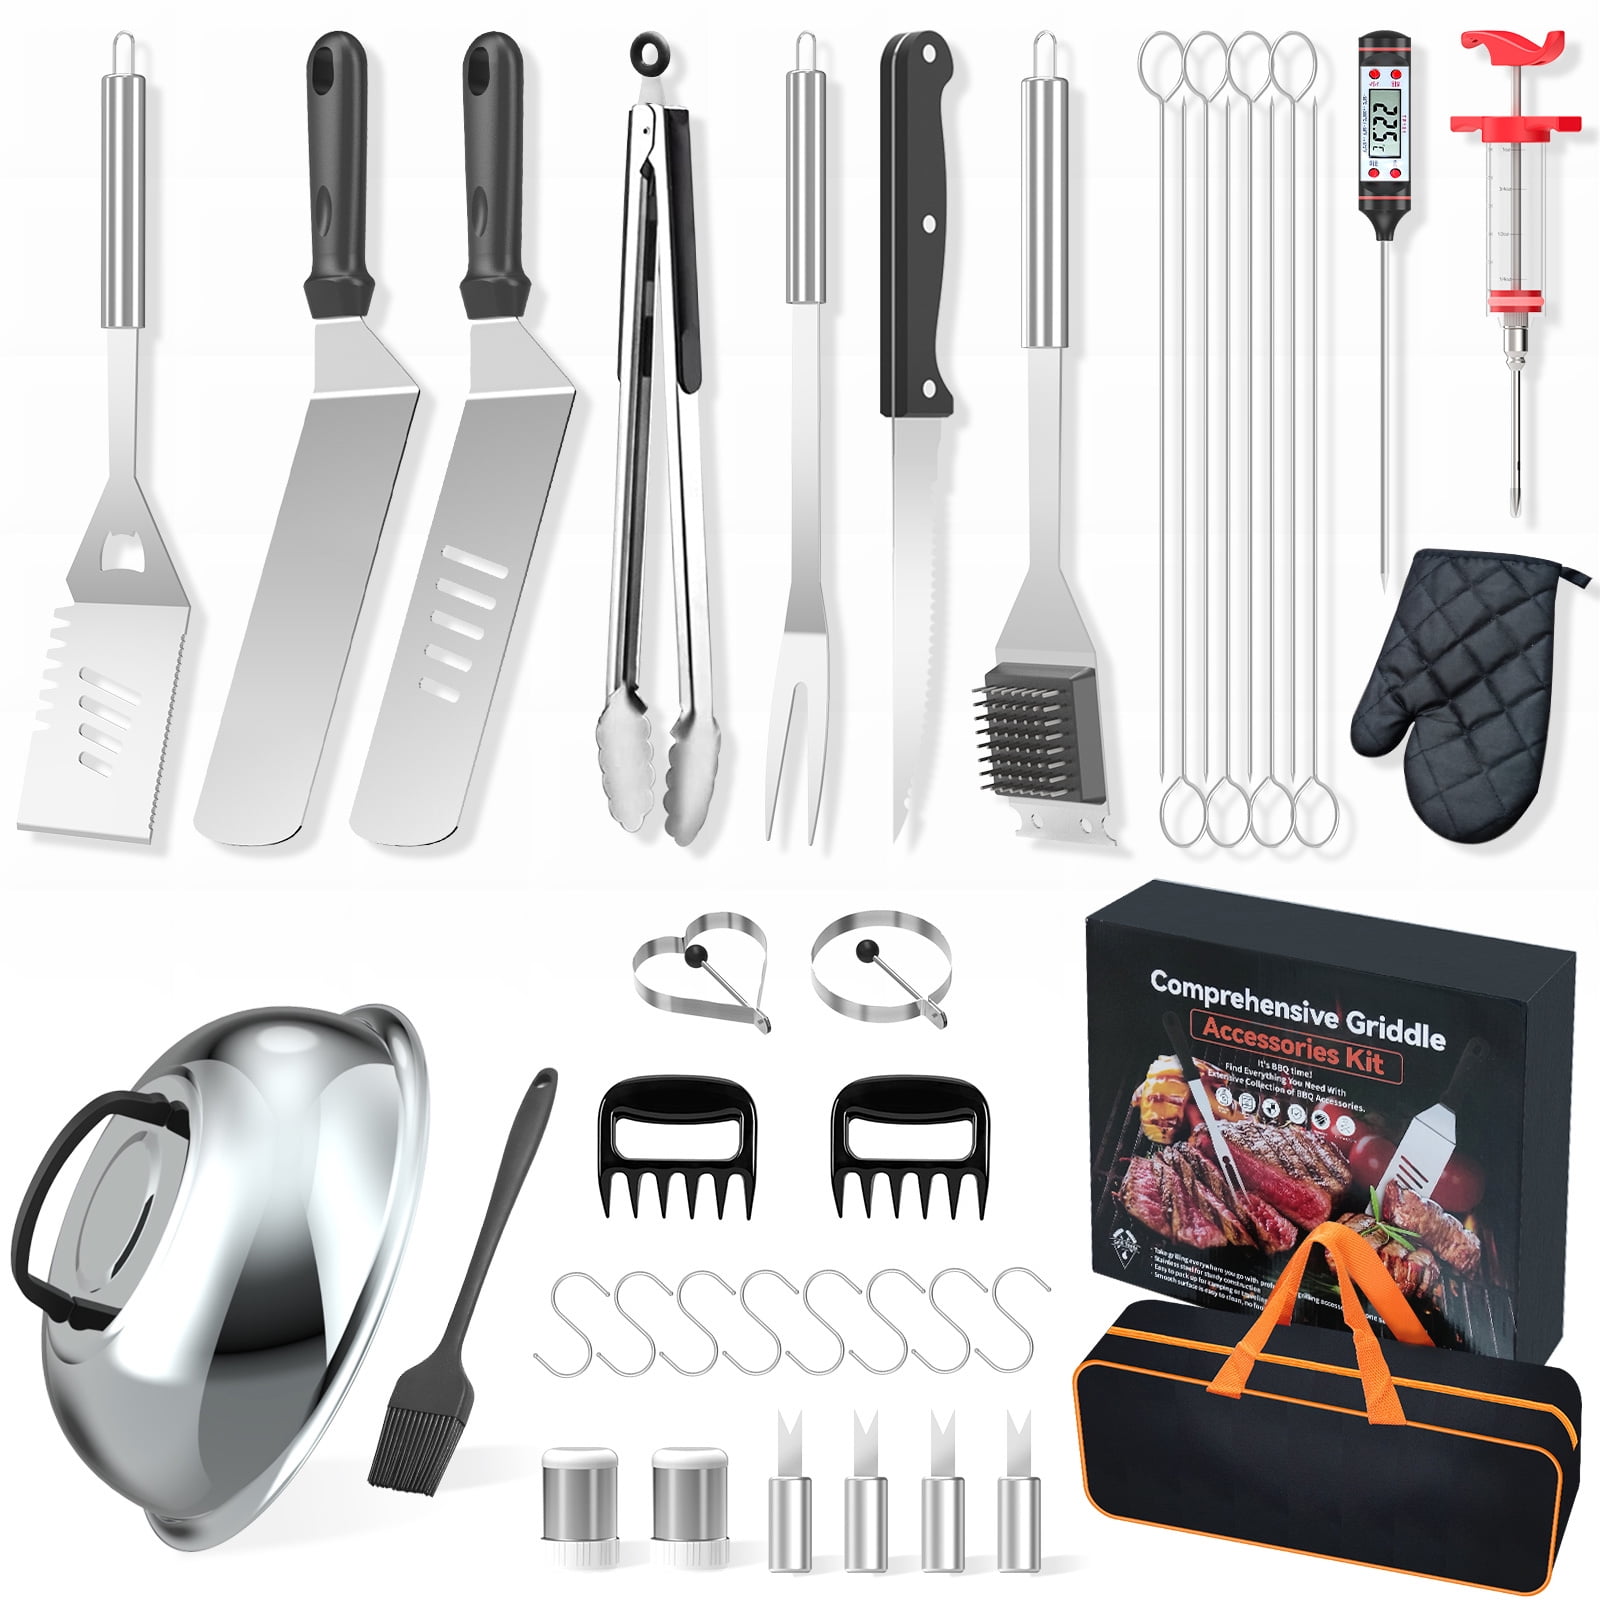 Details about   Griddle Accessories Tool Heavy Duty Metal Spatula Kitchen Dining Utensil 18 Set 